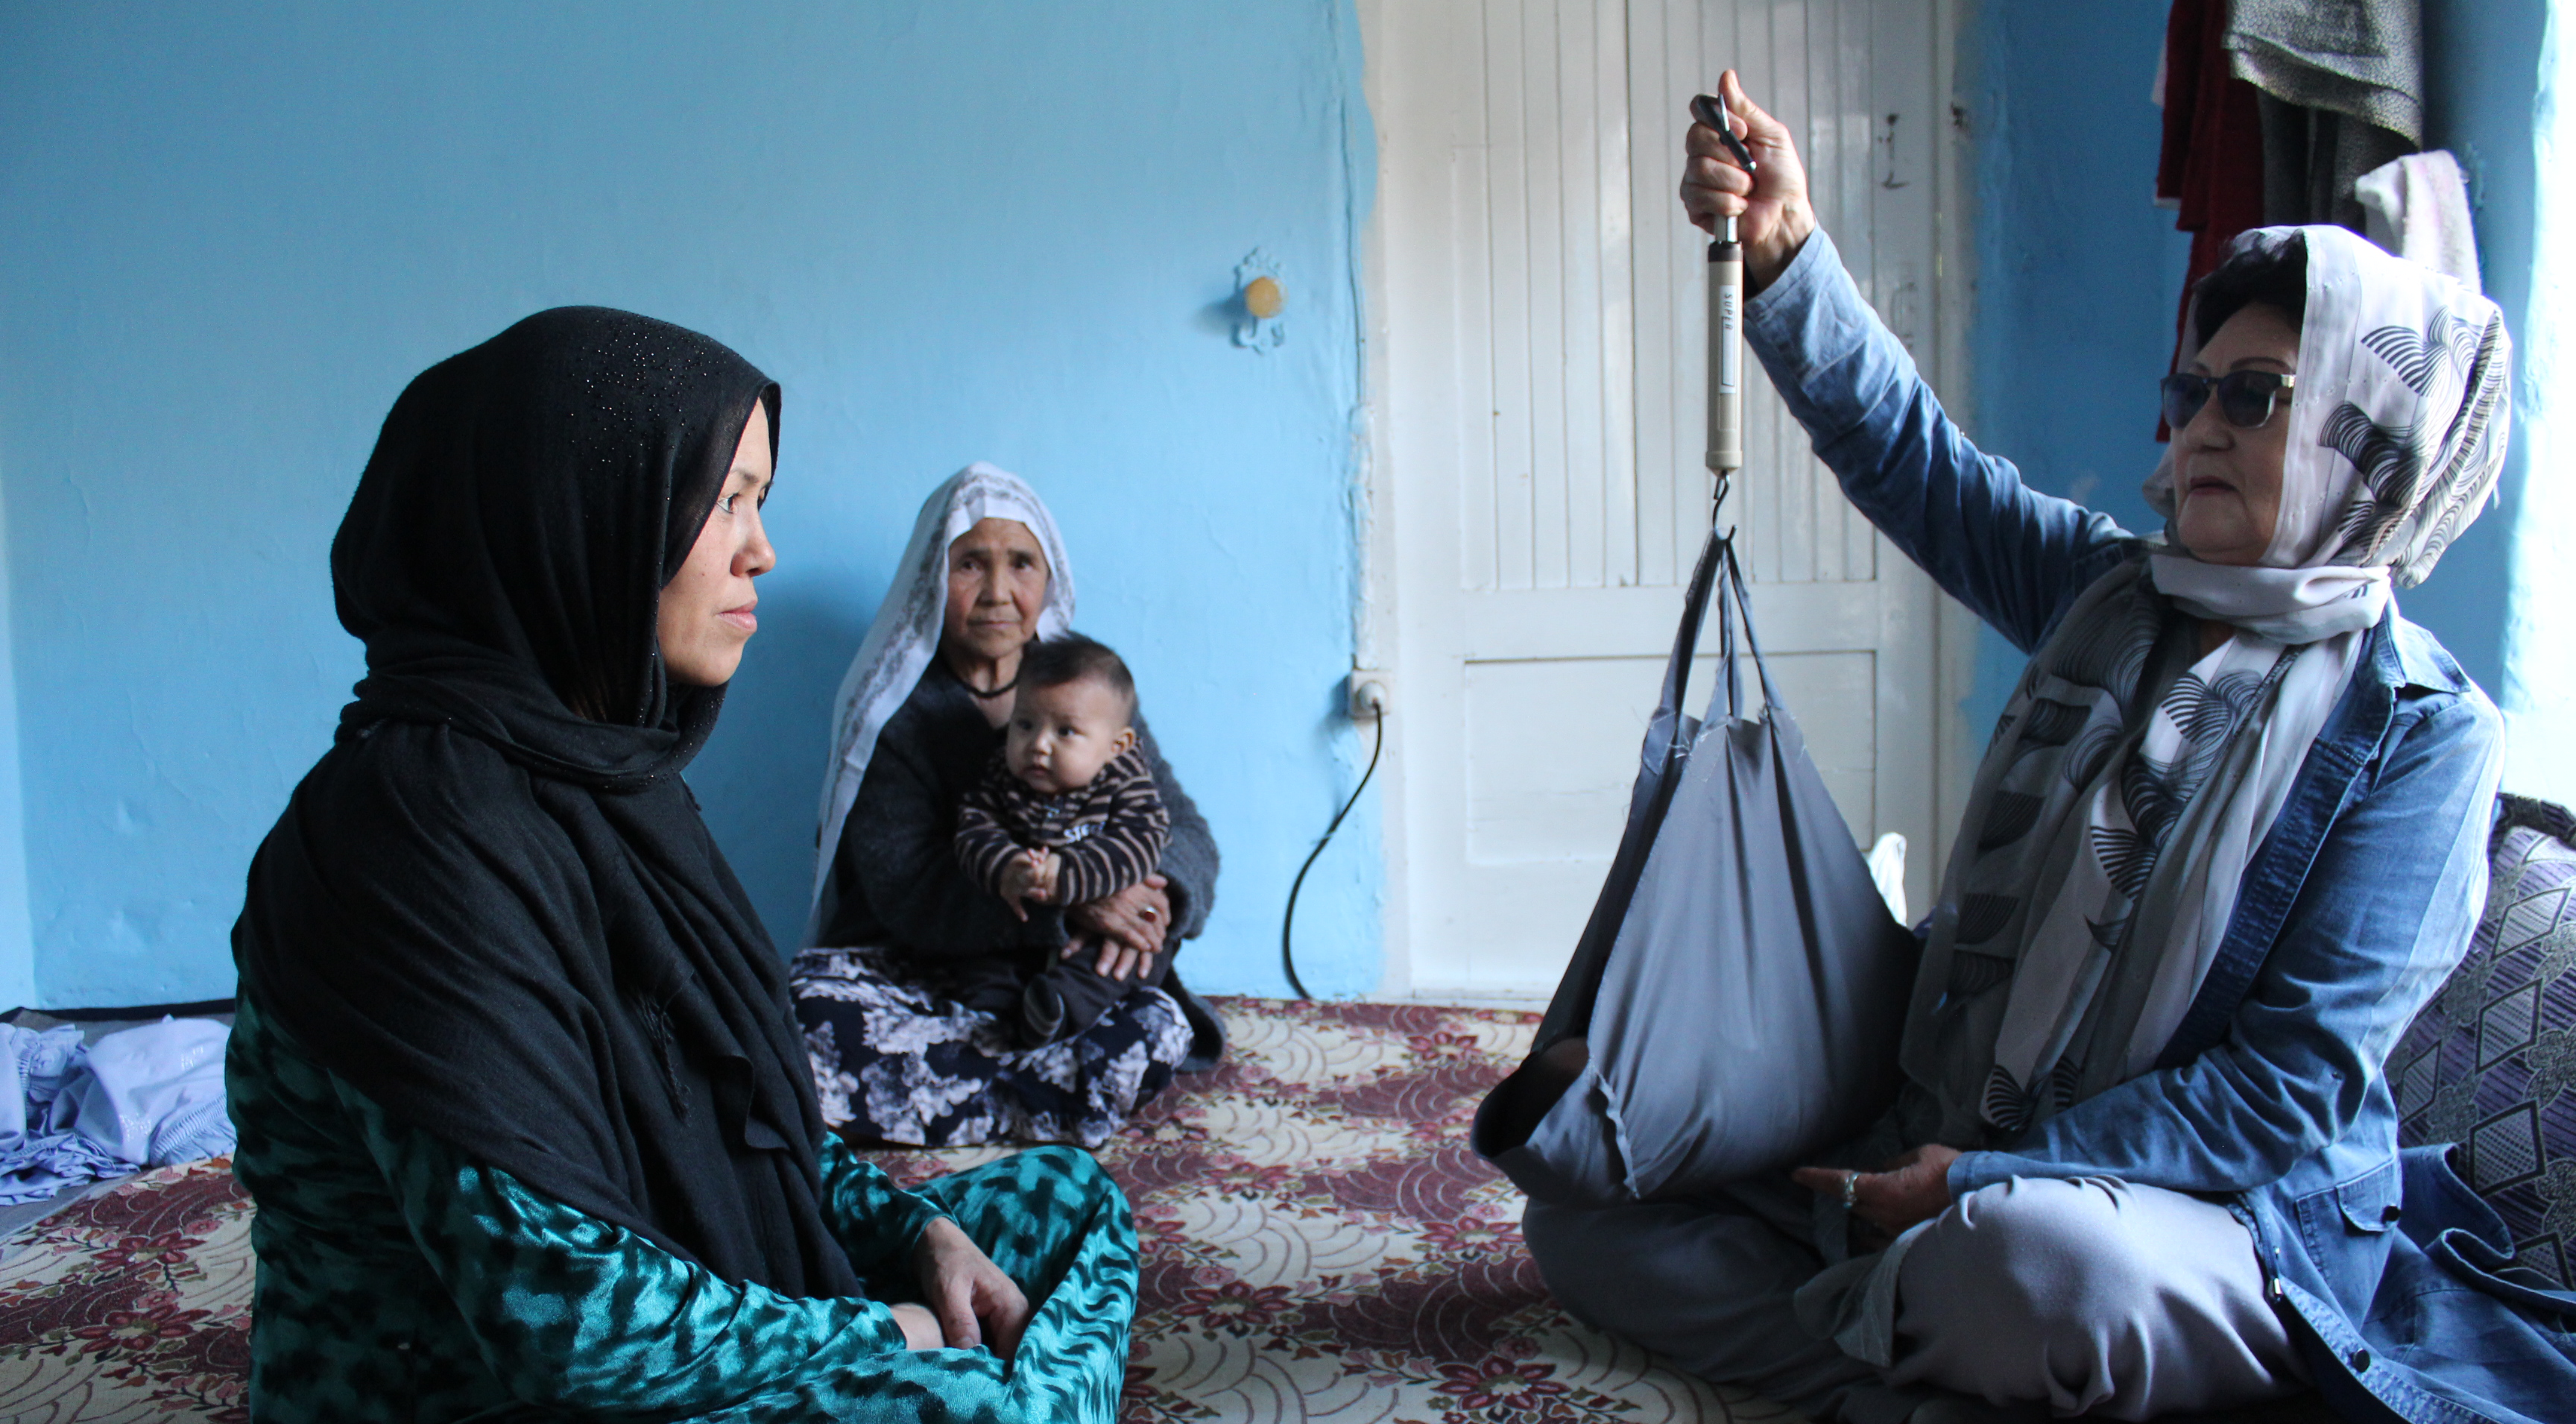 Interview – Health care assistance in a new Afghanistan